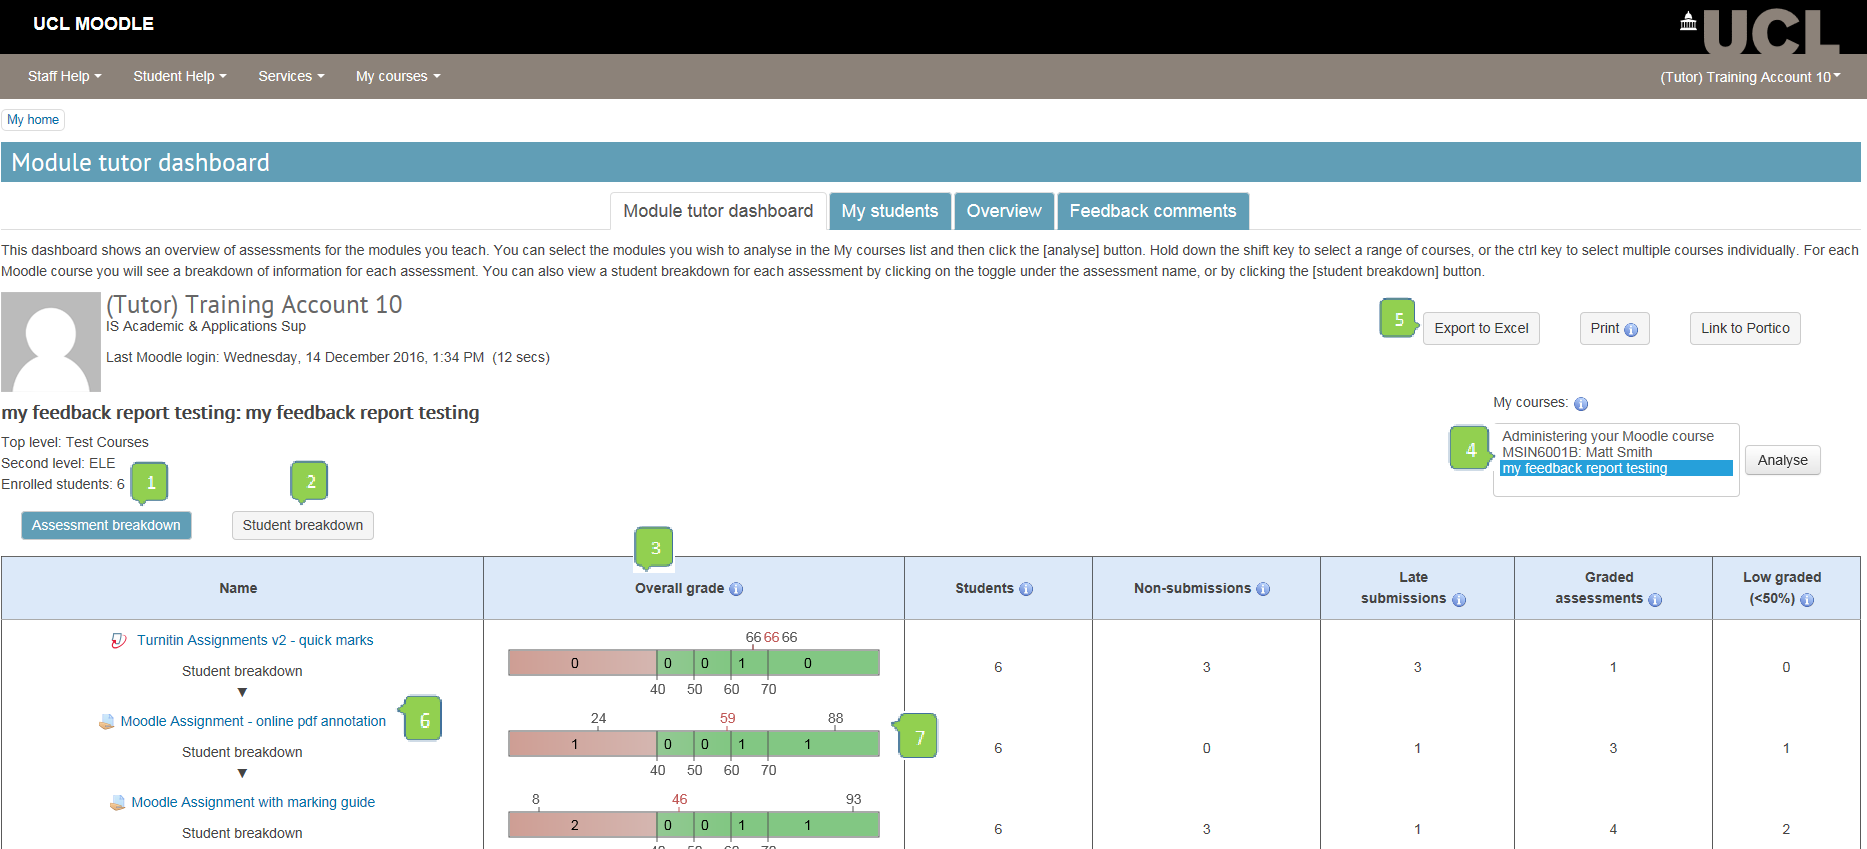 MyFeedback course tutor dashboard showing student names, submissions and grades